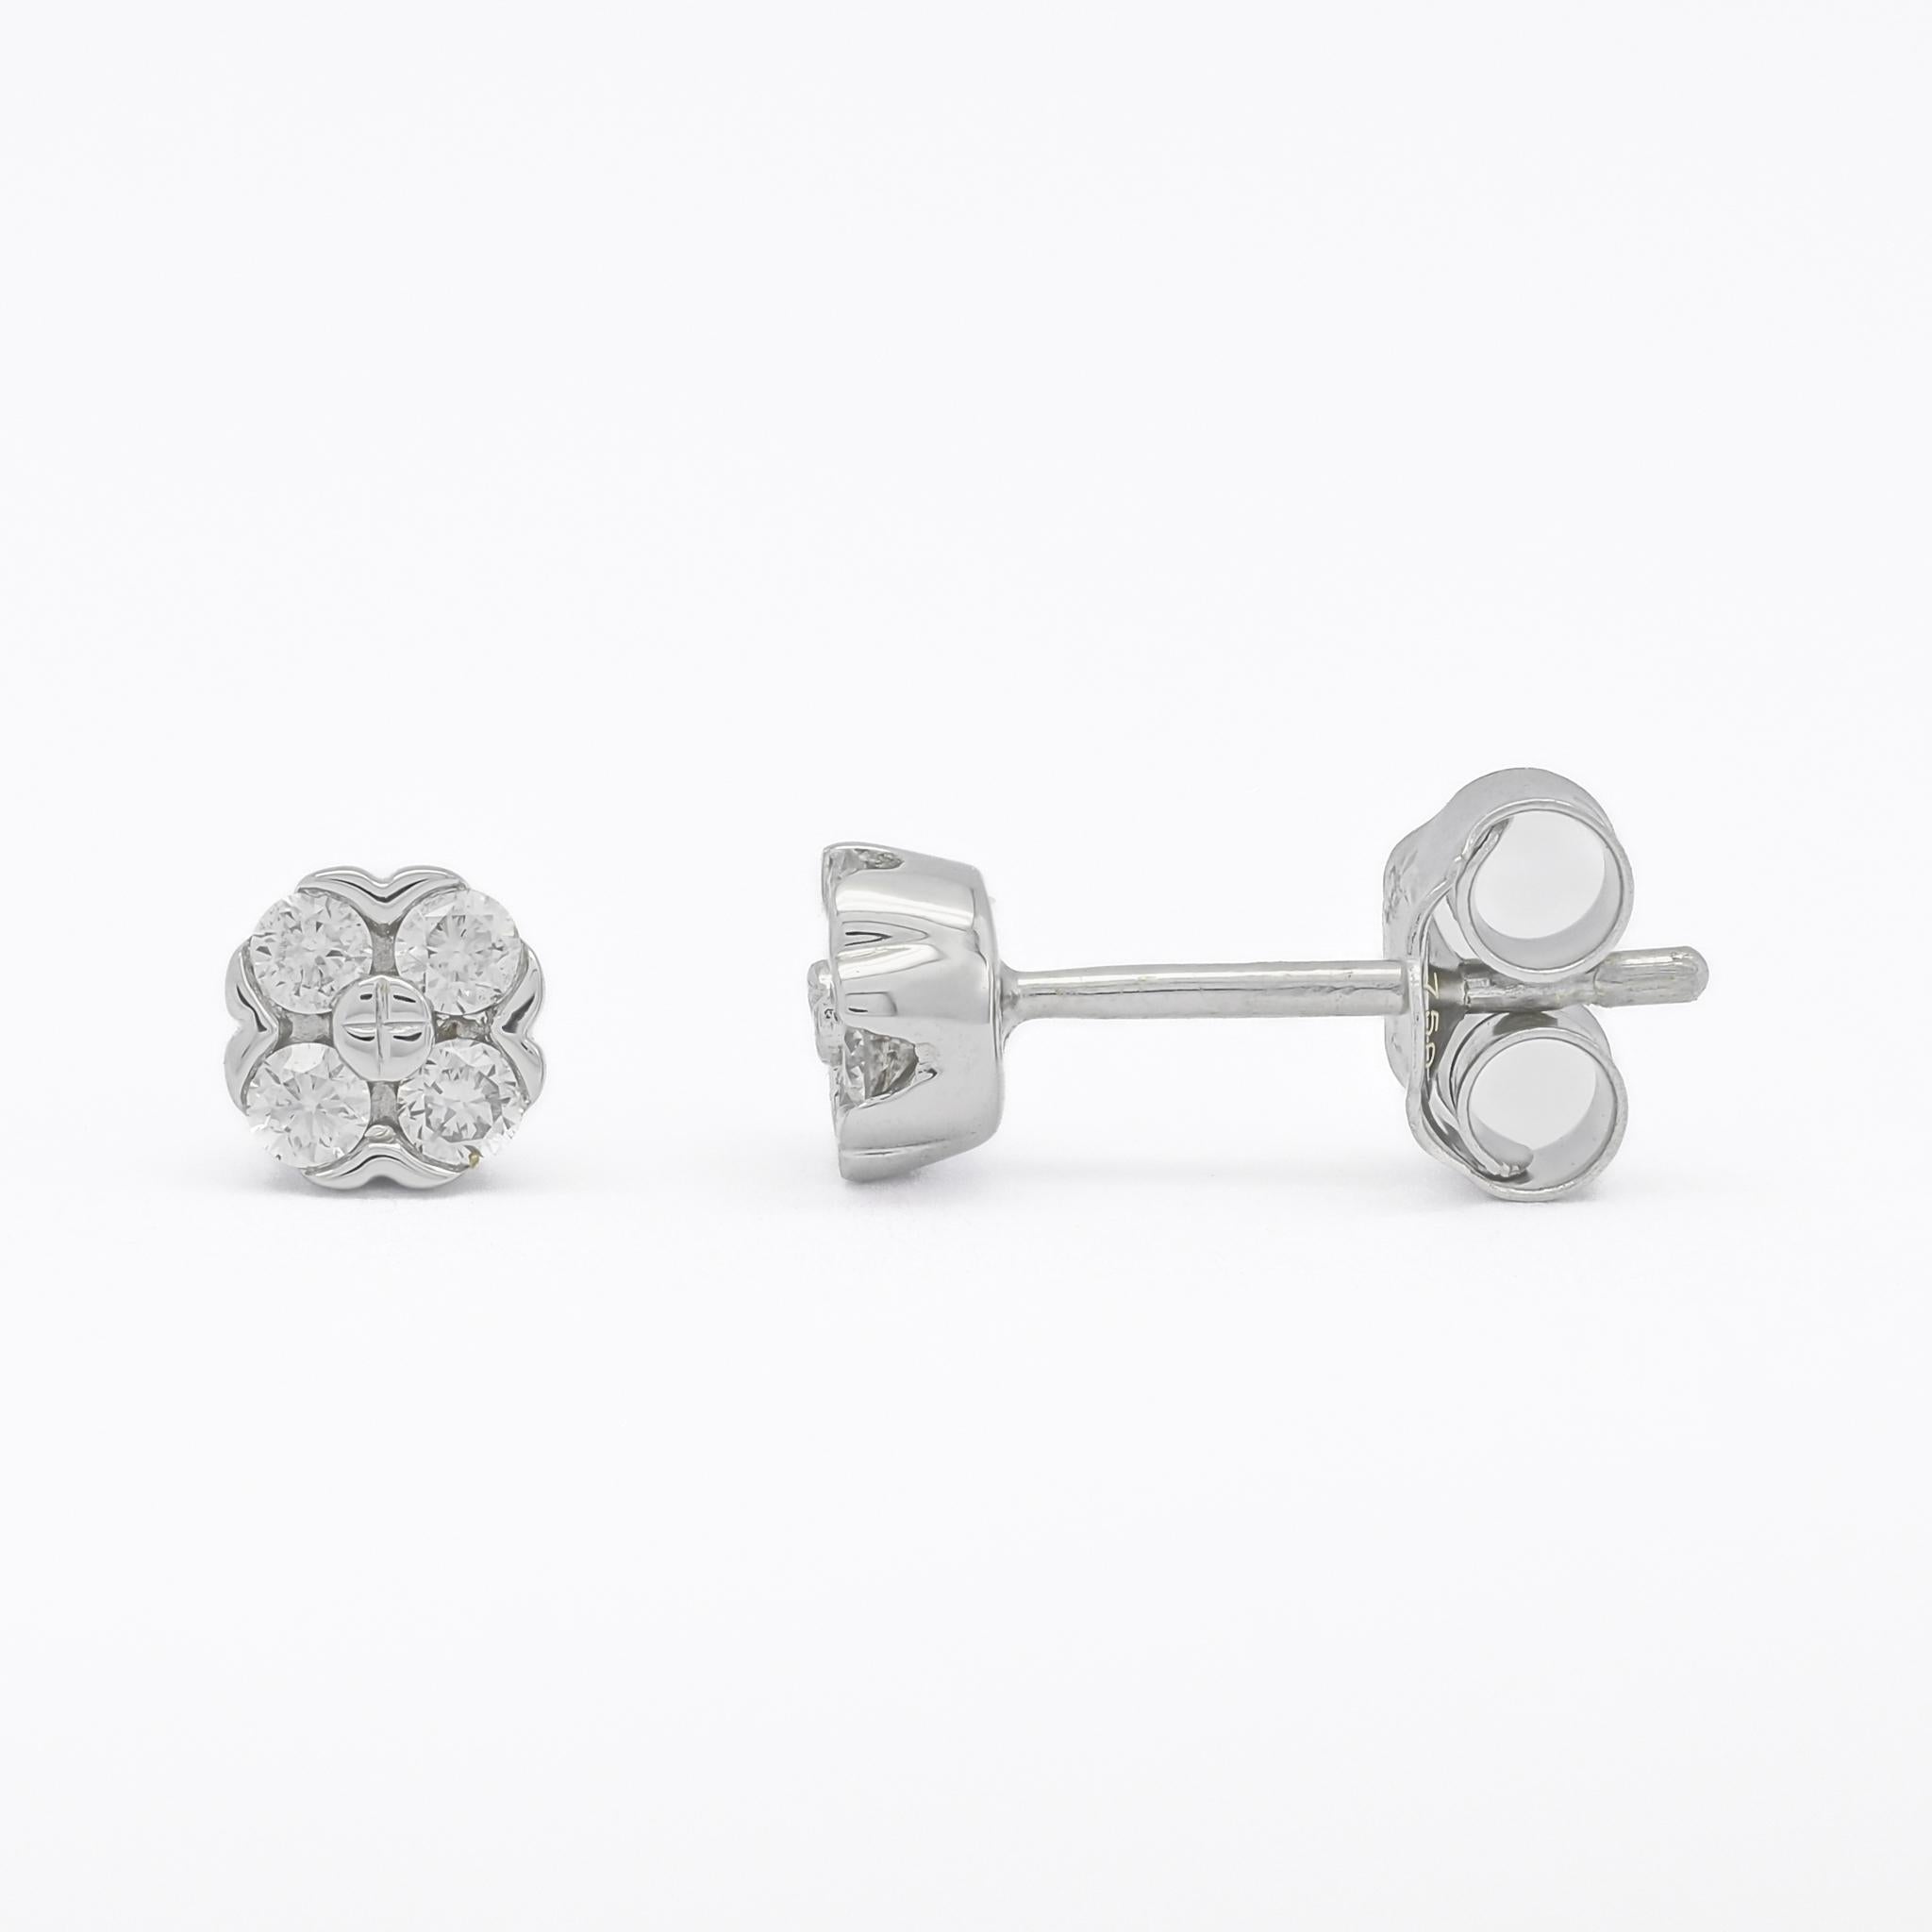 Crafted with meticulous attention to detail, each earring features a mesmerizing arrangement of glistening diamonds set in a bezel flower setting, radiating timeless charm and grace.

The simplicity of the flower shape design adds a touch of whimsy